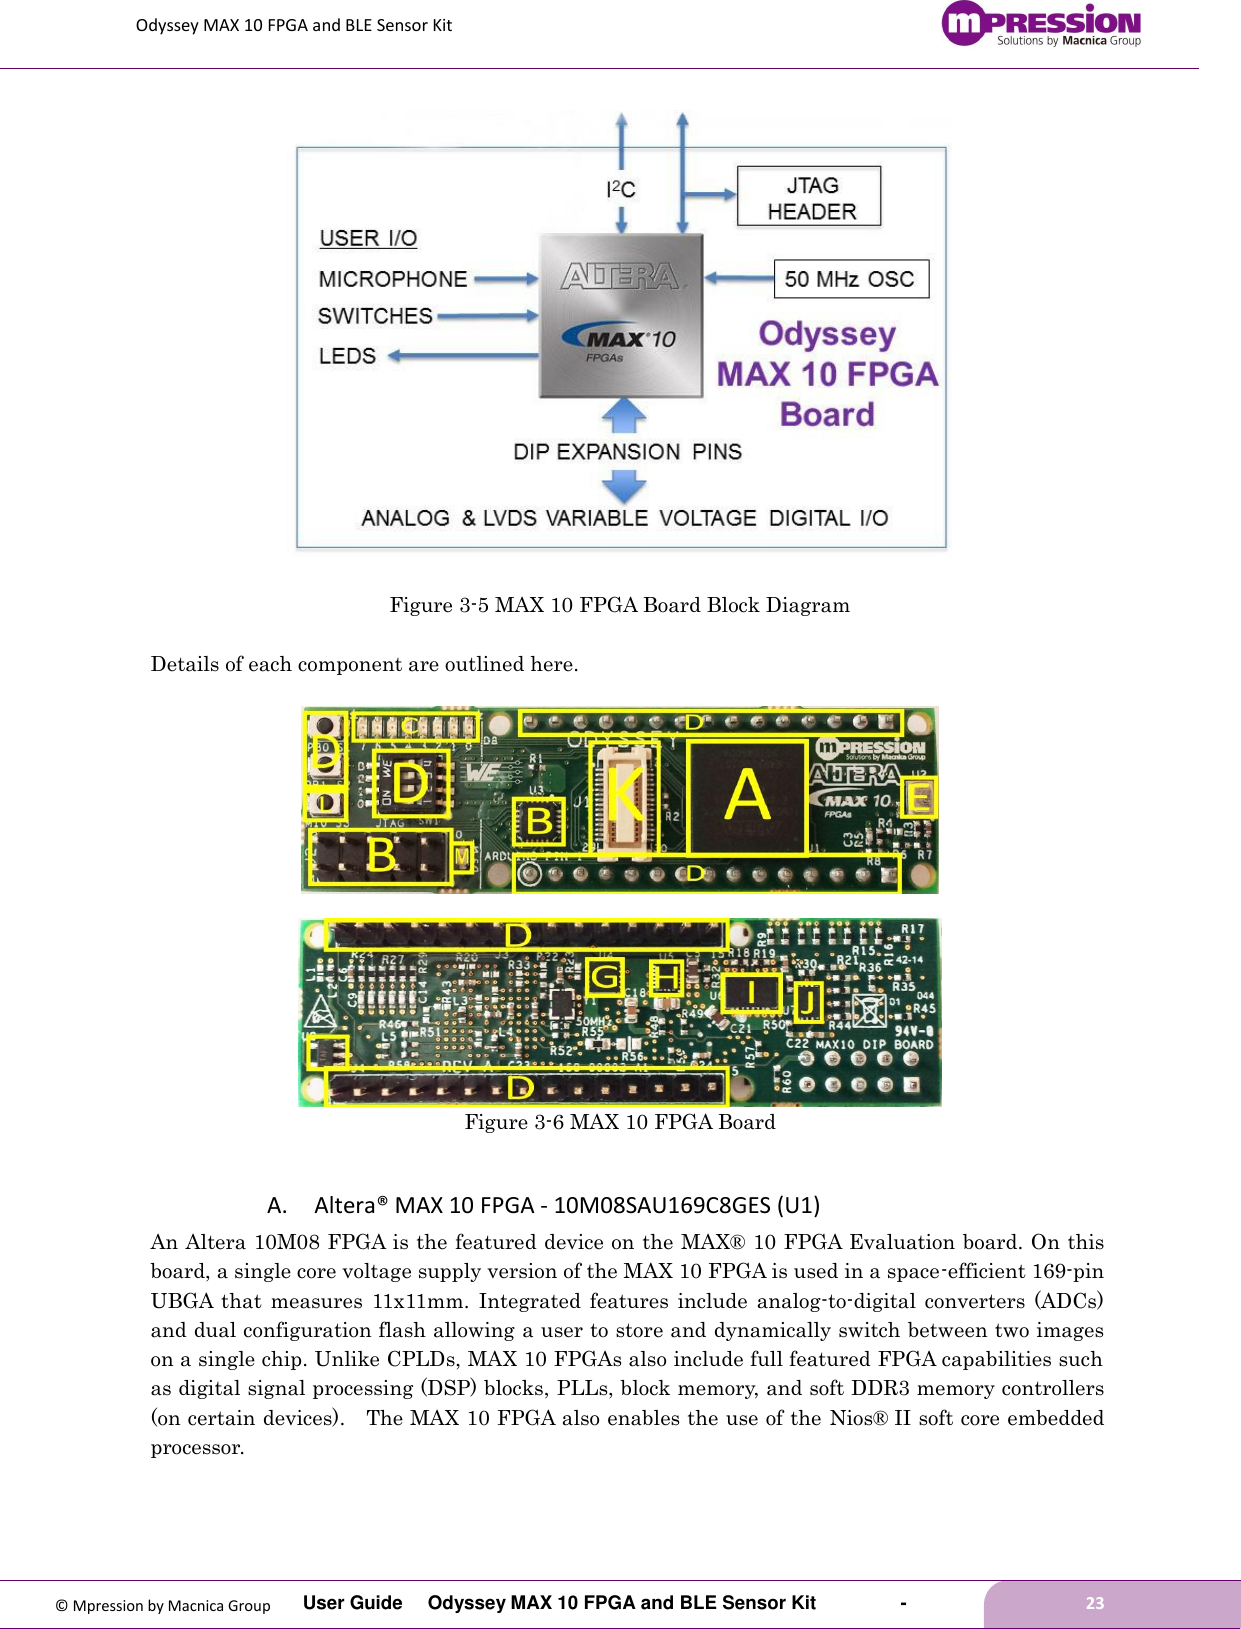 Odyssey MAX 10 FPGA and BLE Sensor Kit         User Guide  Odyssey MAX 10 FPGA and BLE Sensor Kit        -        23  © Mpression by Macnica Group  Figure 3-5 MAX 10 FPGA Board Block Diagram  Details of each component are outlined here.     Figure 3-6 MAX 10 FPGA Board  A. Altera® MAX 10 FPGA - 10M08SAU169C8GES (U1) An Altera 10M08 FPGA is the featured device on the MAX® 10 FPGA Evaluation board. On this board, a single core voltage supply version of the MAX 10 FPGA is used in a space-efficient 169-pin UBGA  that  measures  11x11mm.  Integrated  features  include  analog-to-digital  converters  (ADCs) and dual configuration flash allowing a user to store and dynamically switch between two images on a single chip. Unlike CPLDs, MAX 10 FPGAs also include full featured FPGA capabilities such as digital signal processing (DSP) blocks, PLLs, block memory, and soft DDR3 memory controllers (on certain devices).  The MAX 10 FPGA also enables the use of the Nios® II soft core embedded processor. 